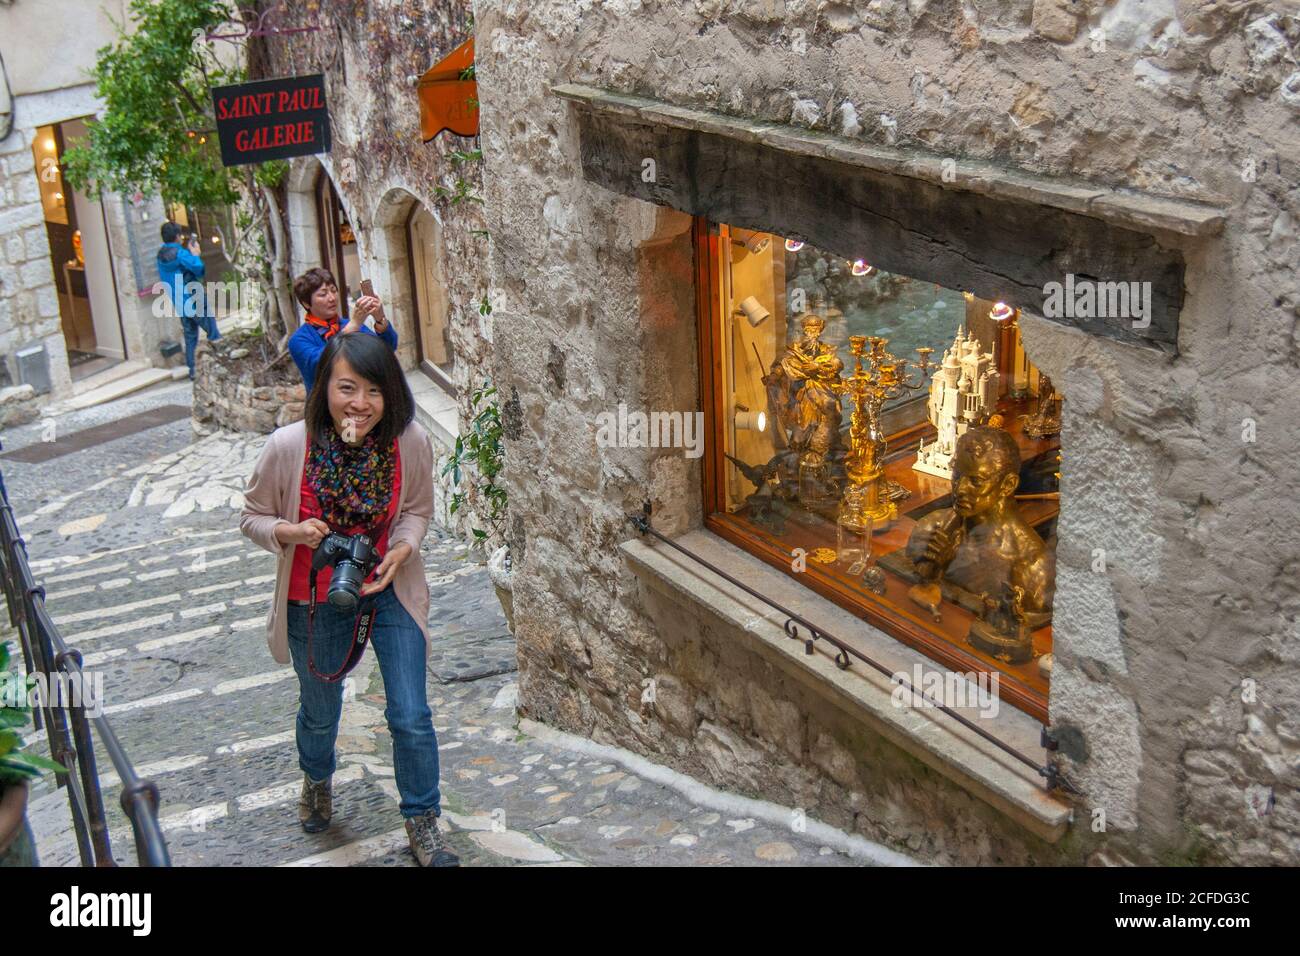 Saint-Paul-de-Vence France Photographers on every corner of the street. Smiling japanese tourist girl with camera. Artworks in the shop window. Stock Photo